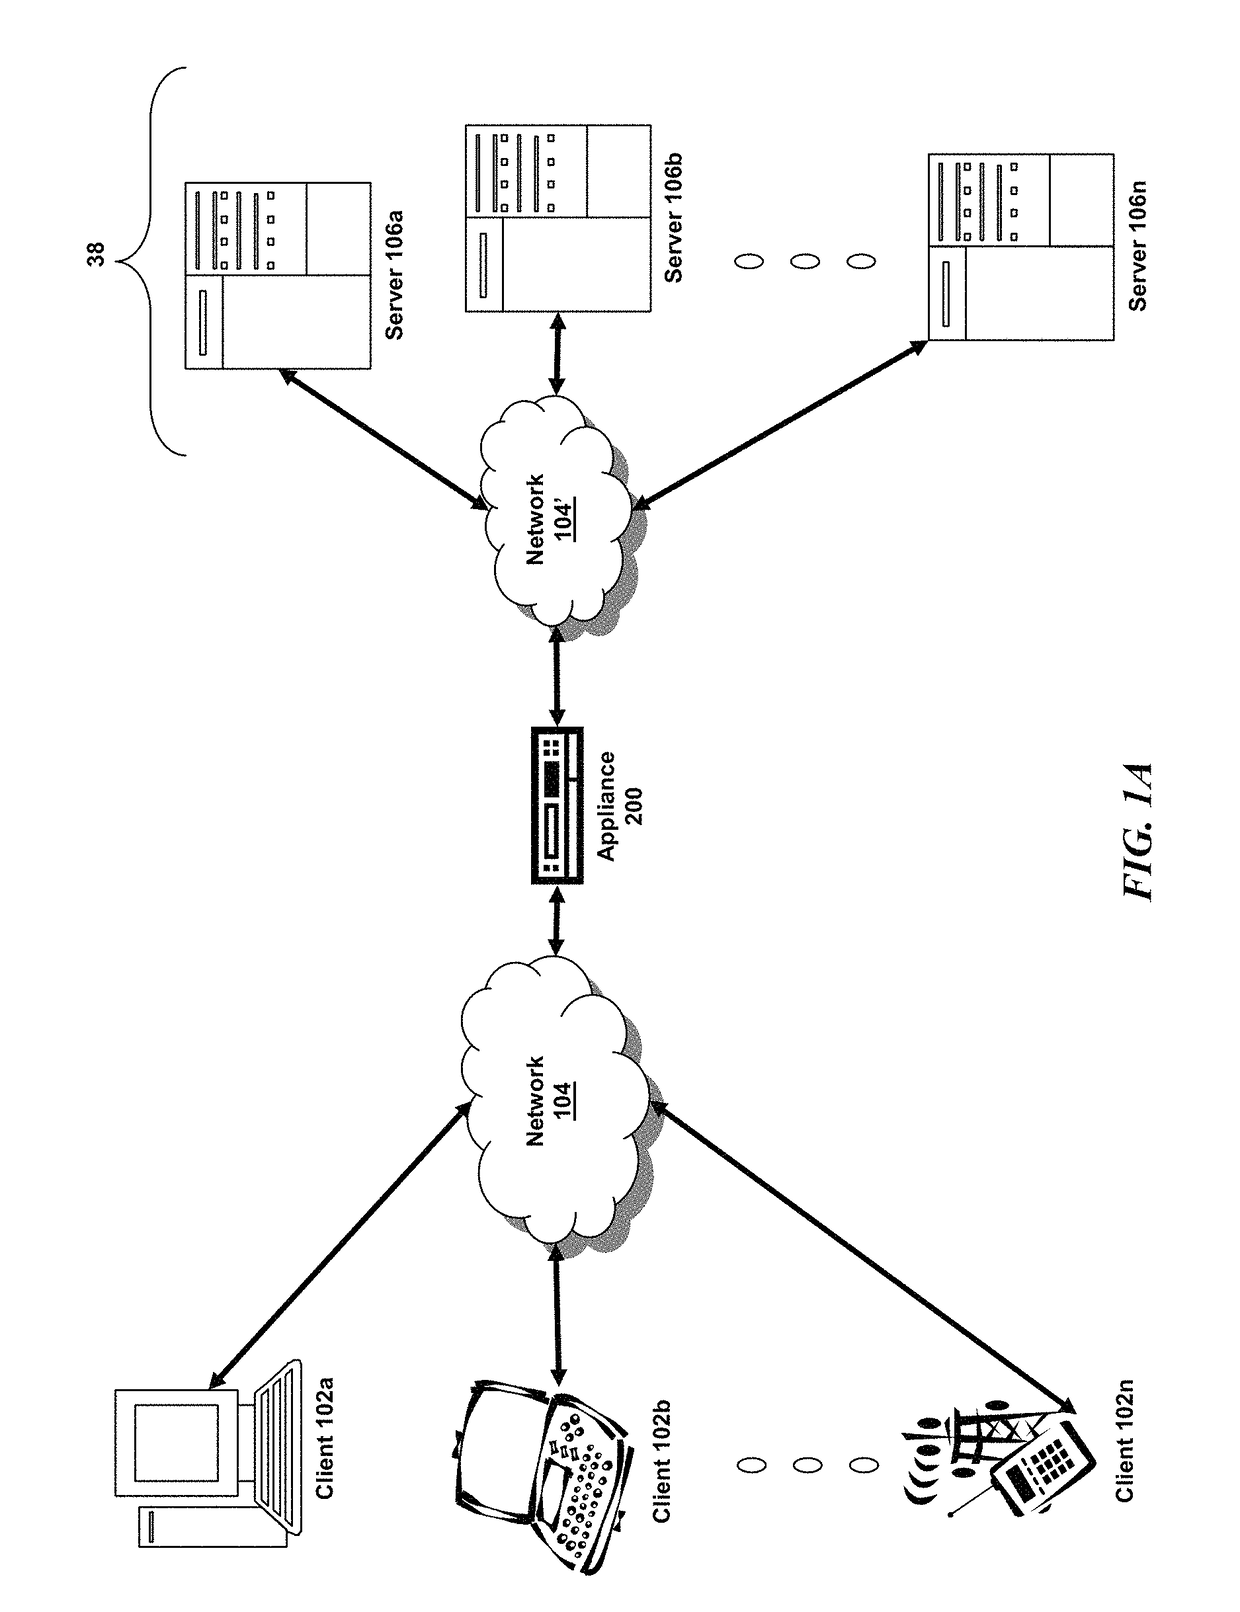 Systems and methods for exporting client and server timing information for webpage and embedded object access